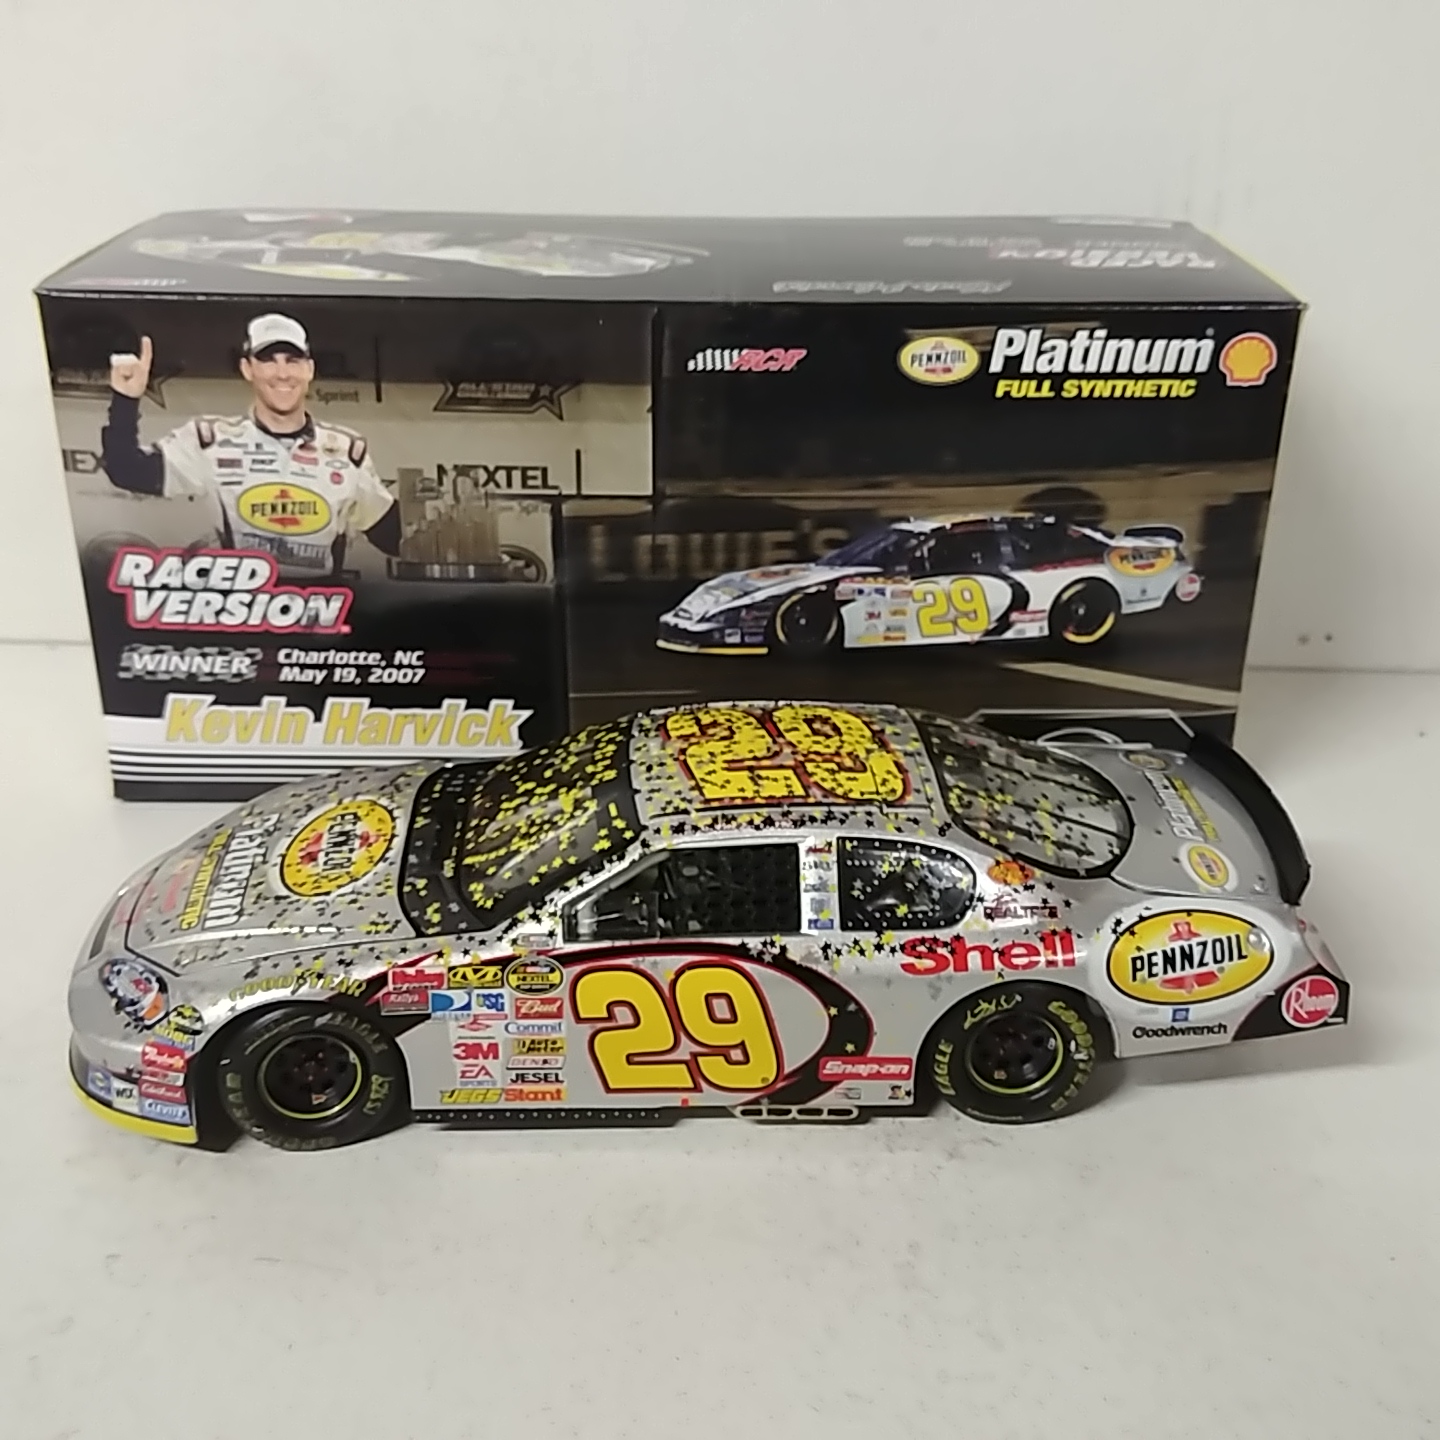 2007 Kevin Harvick 1/24th Pennzoil Platium Full Synthetic "All-Star Win" Monte Carlo SS